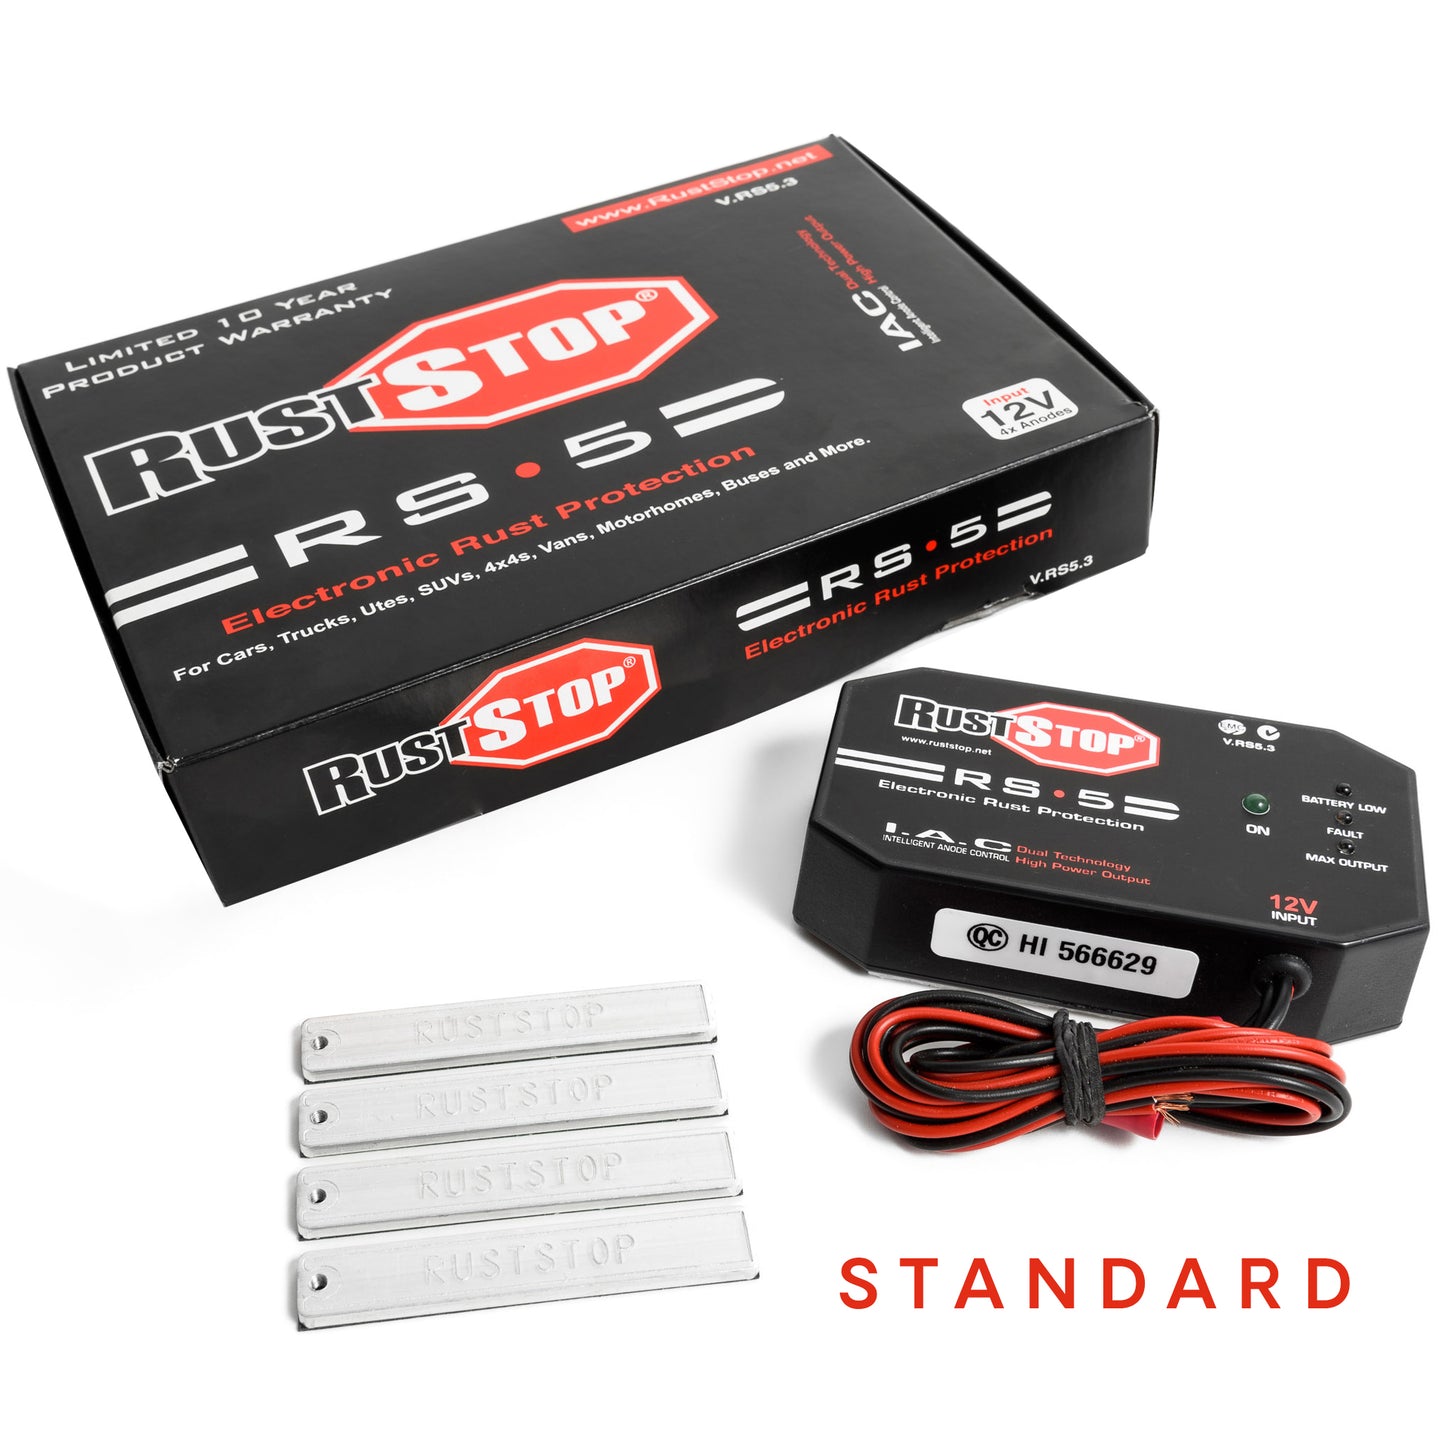 RustStop RS-5 (12V) Standard Electronic Rust Protection